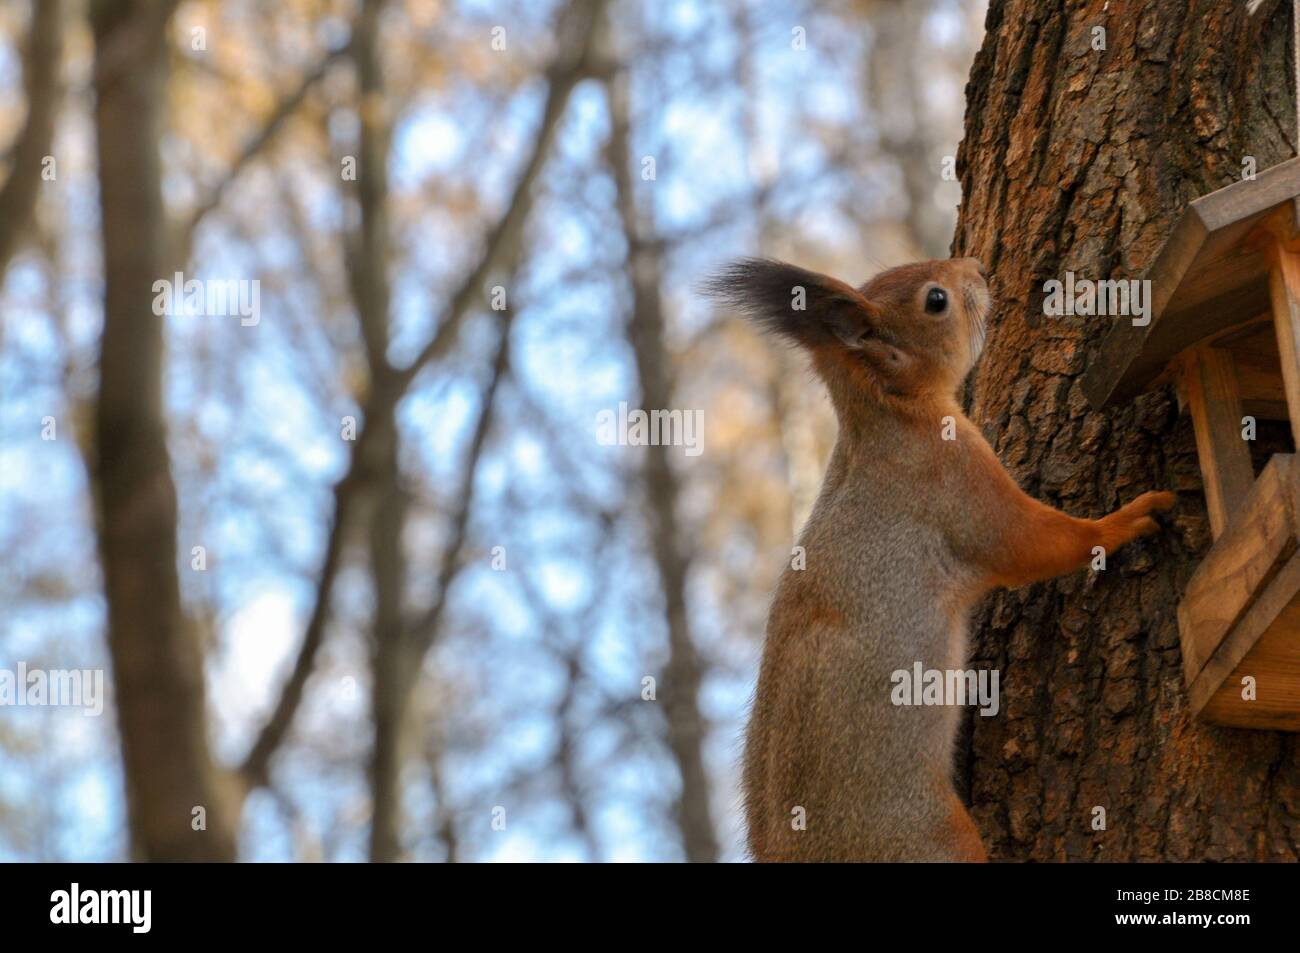 Cute furry squirrel climbes up tree in park. Stock Photo